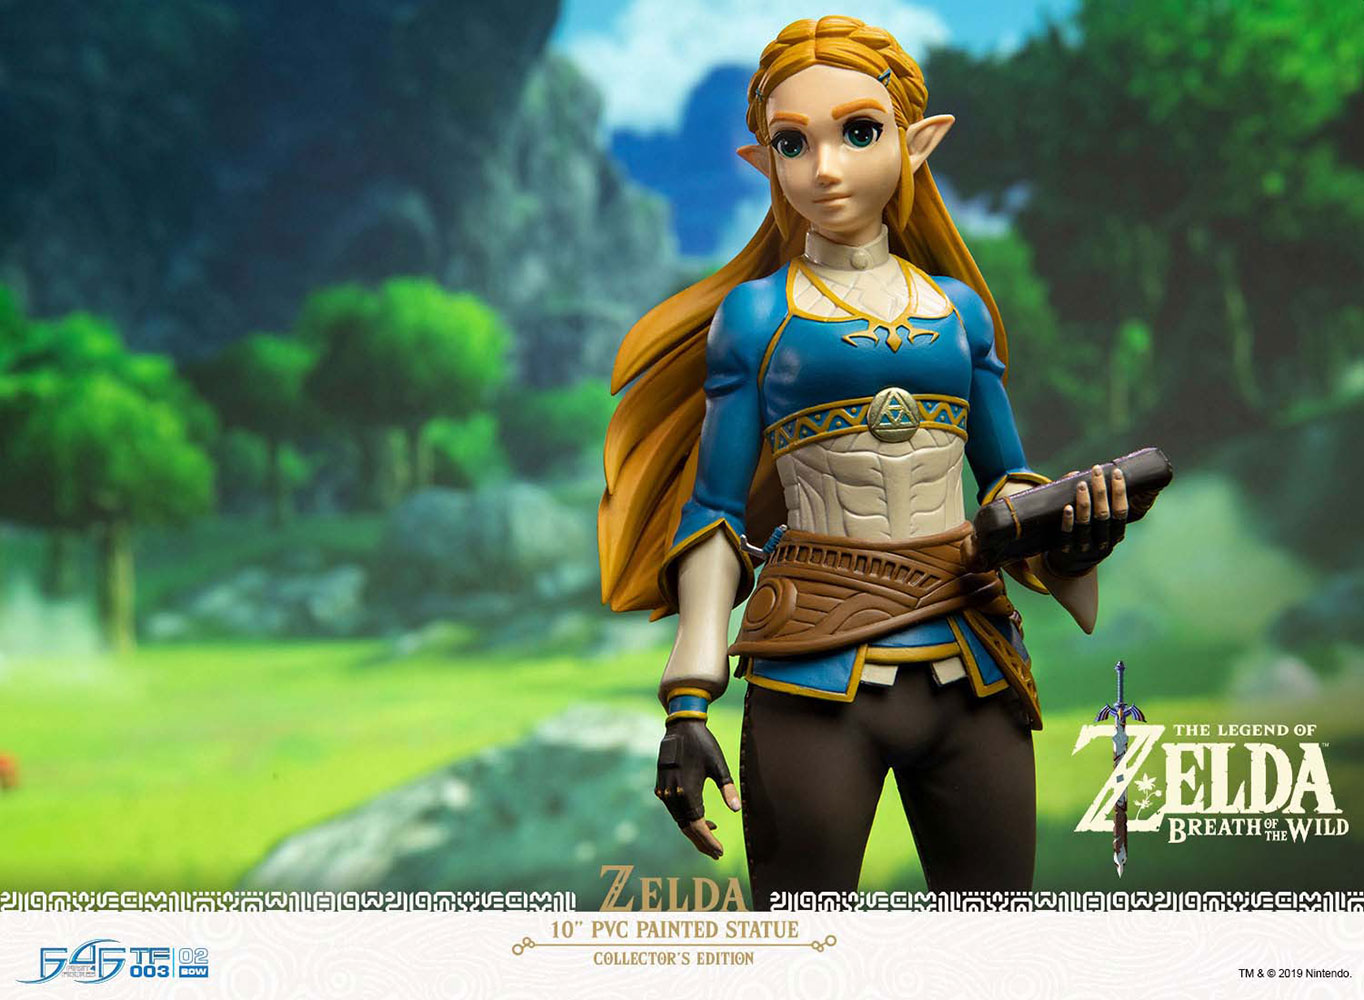 The Legend of of the Wild Zelda (Collector's Edition) Statue |